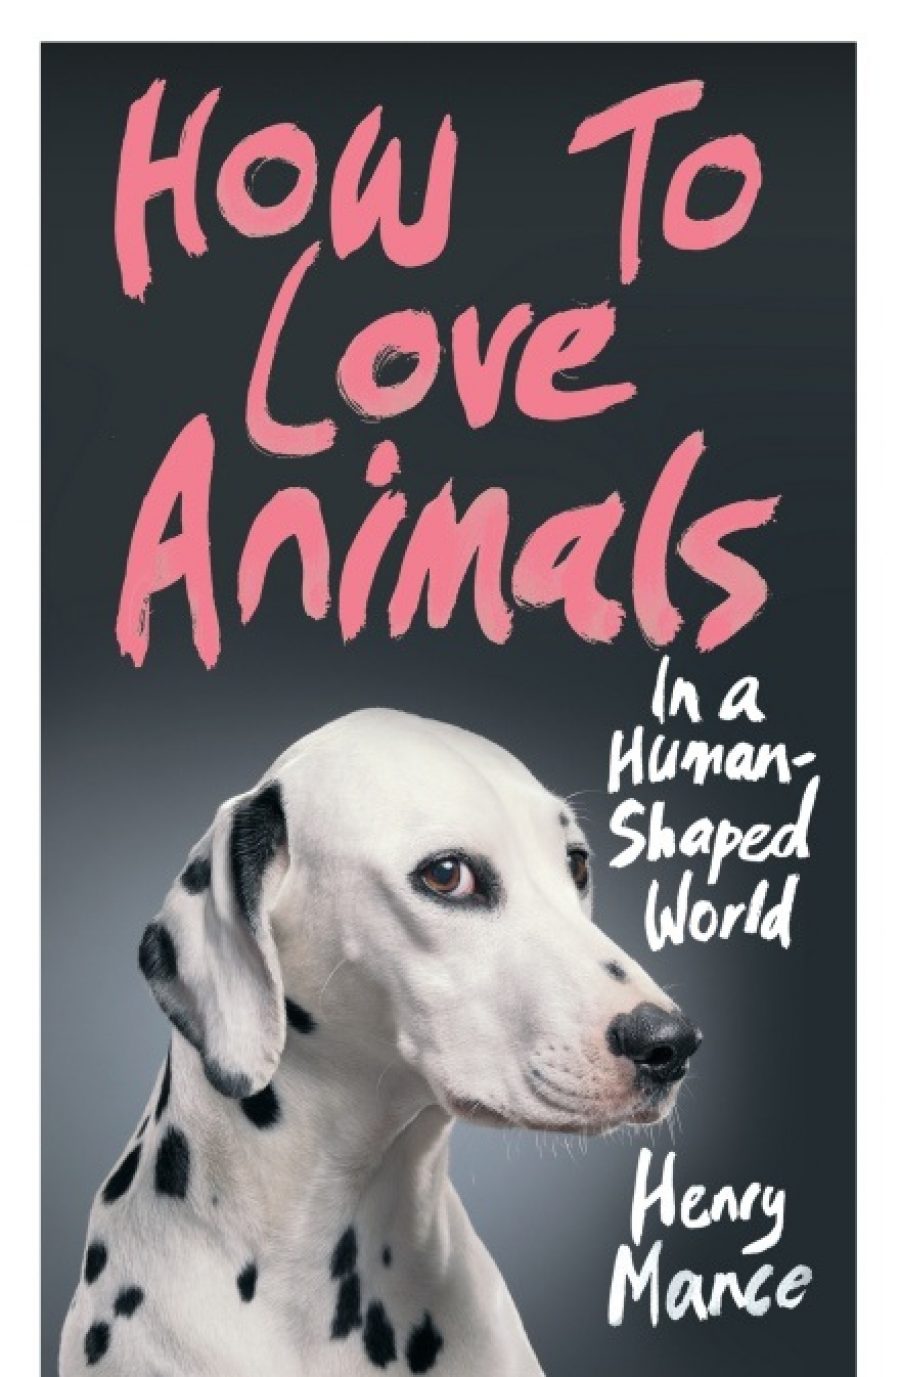 Book cover of 'How to Love Animals' by Henry Mance. Head and shoulders view of a dalmation dog.